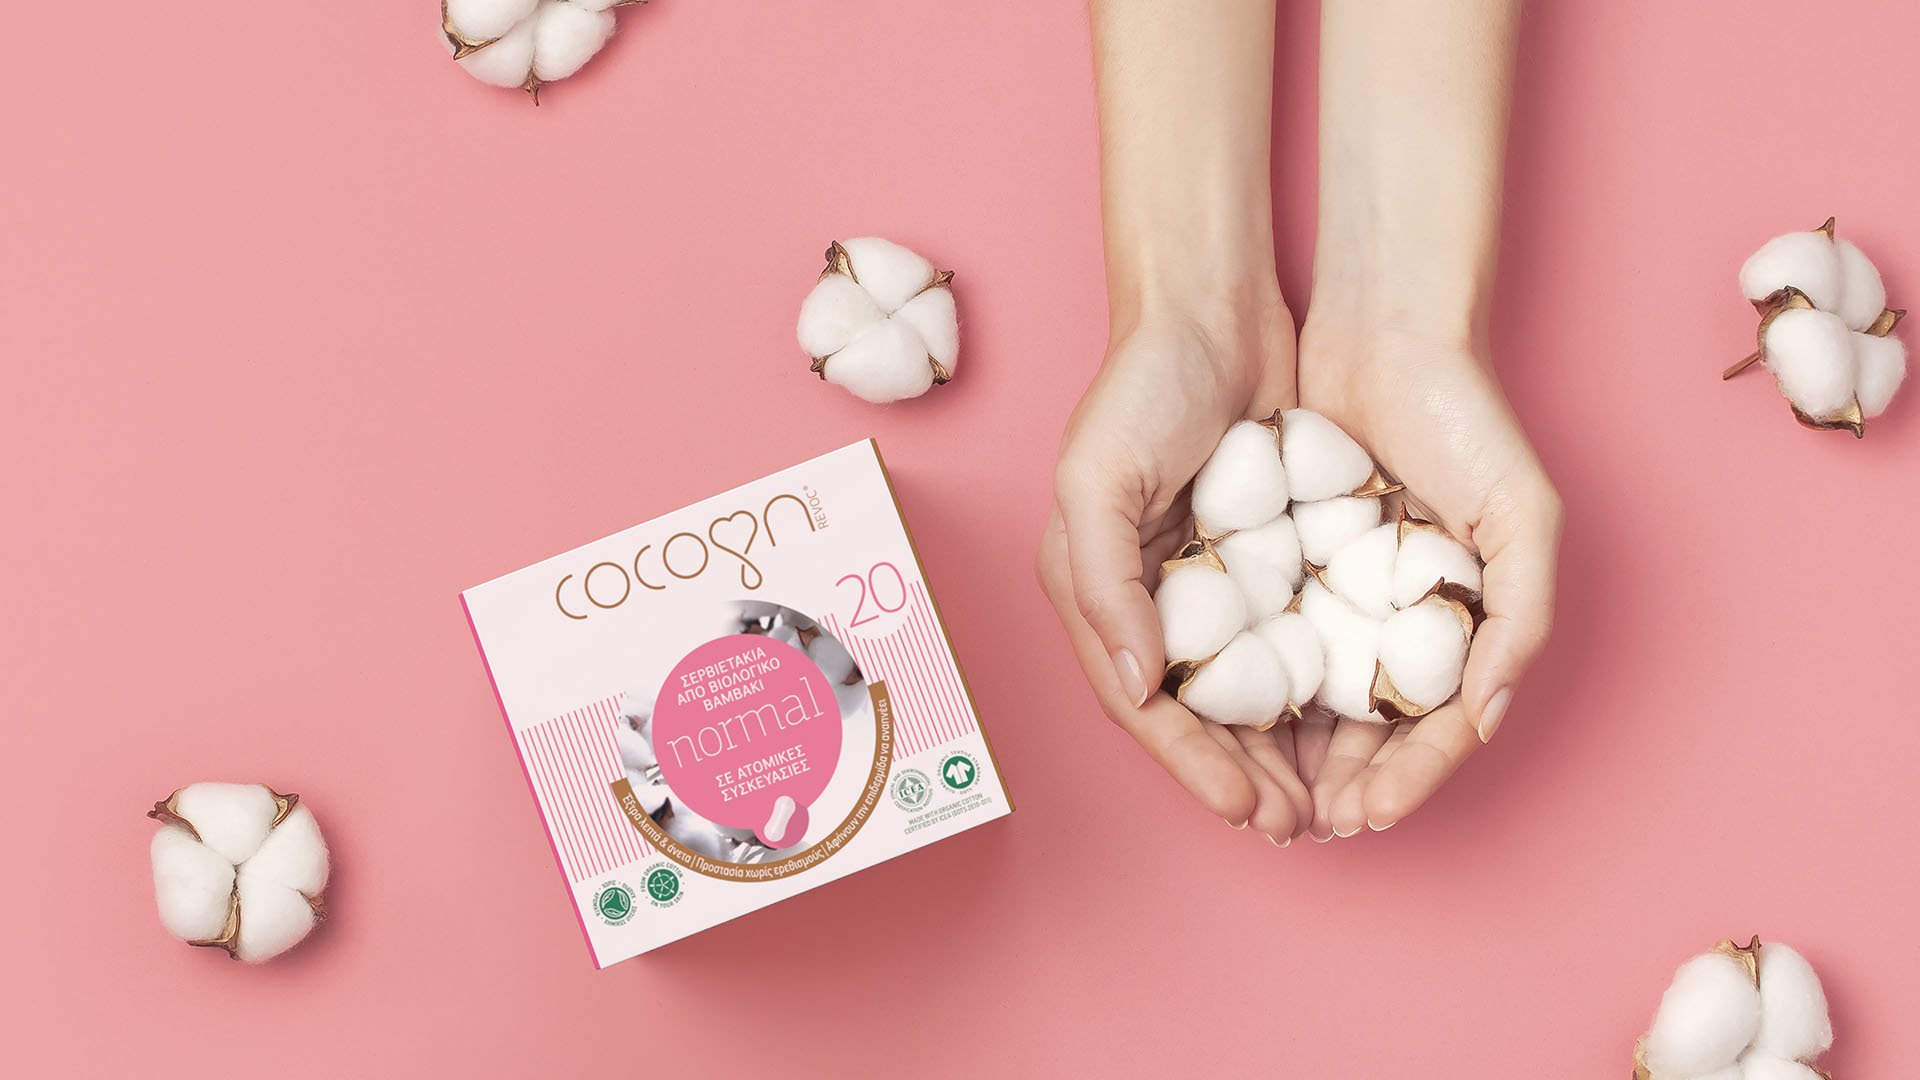 Cocoon biodegradable sanitary pads carton box next to hands holding cotton